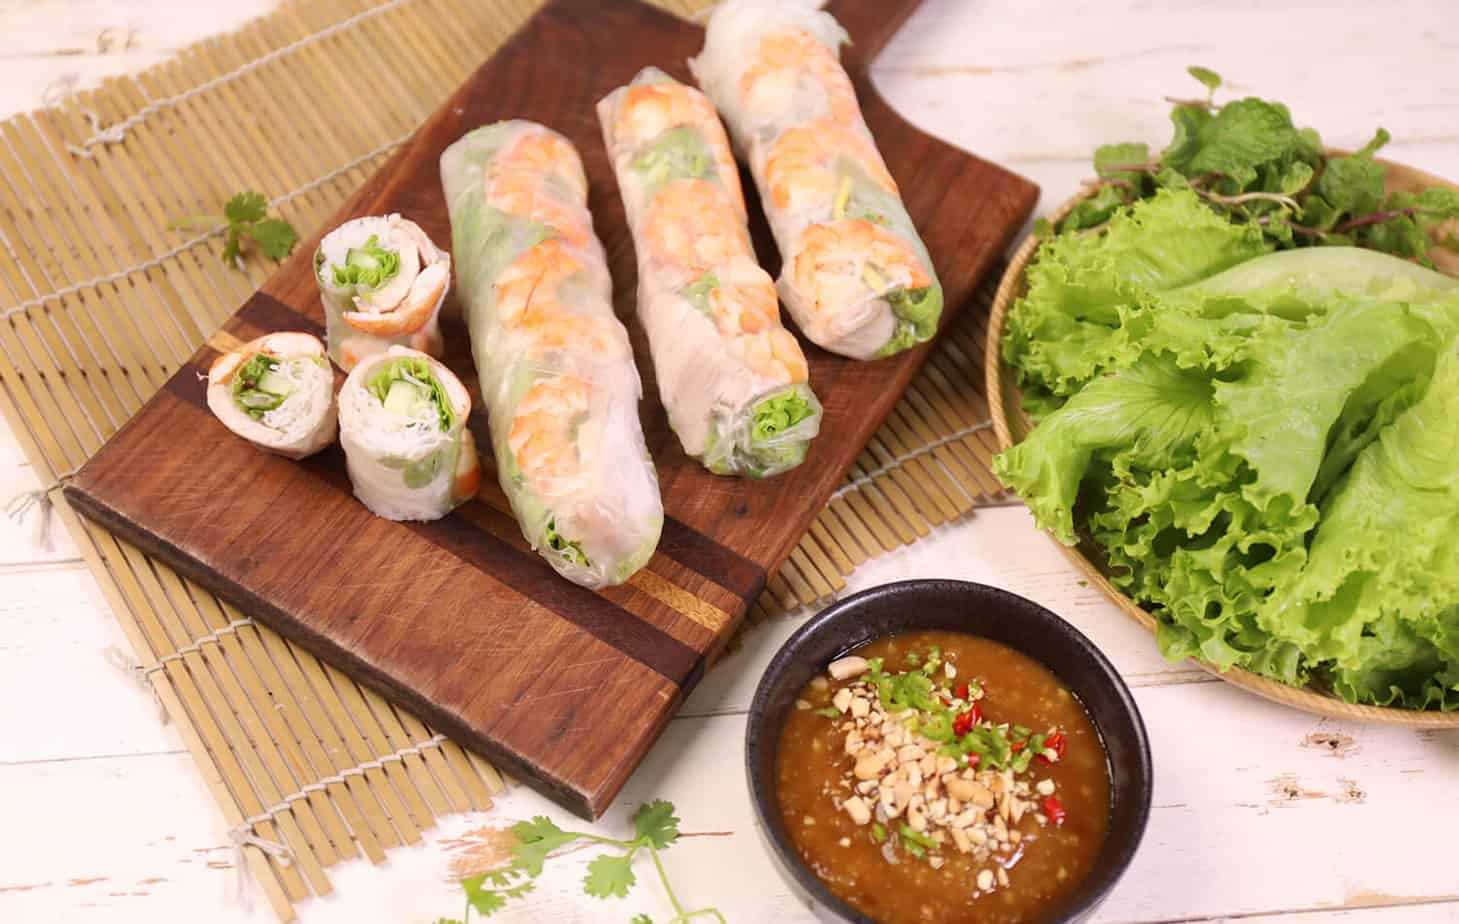 Top 20 Must-Try Dishes in Vietnam - Gỏi Cuốn